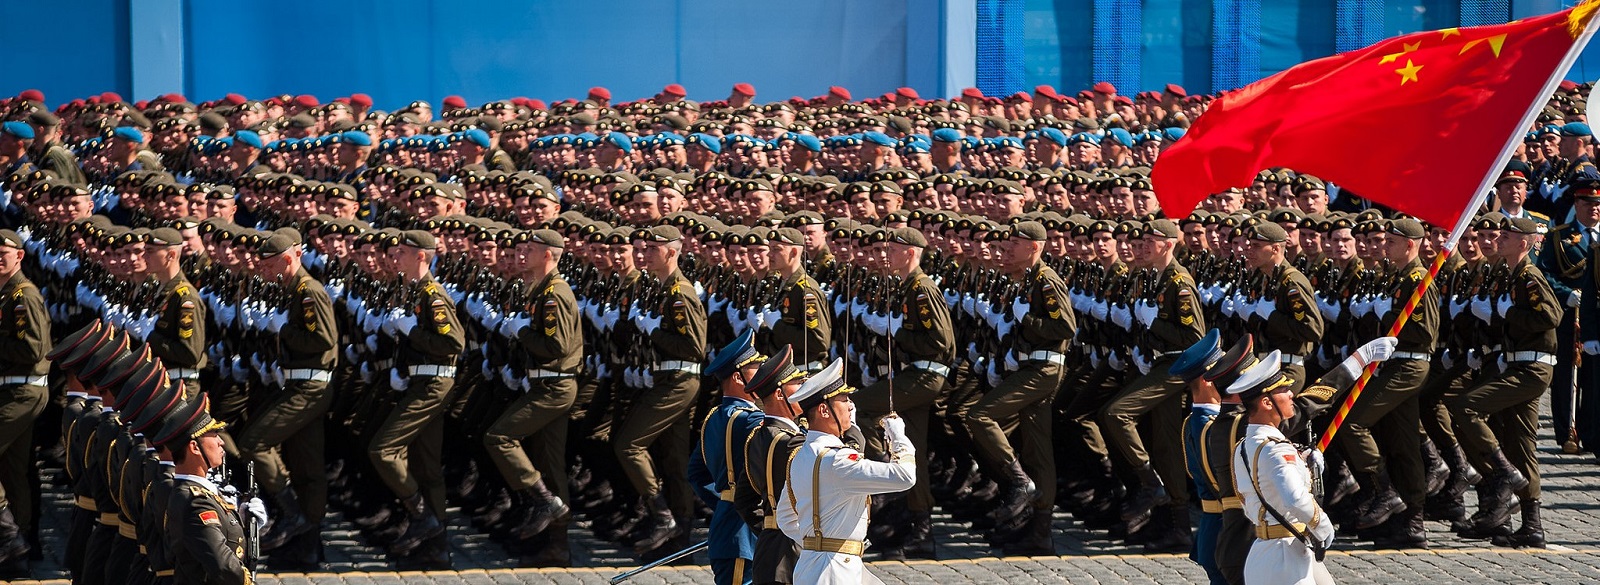 The PLA's 'Battalion of Honour' marched for the first time in Moscow's Victory Day parade in 2015 (Photo: Flickr/Dmitriy Fomin)